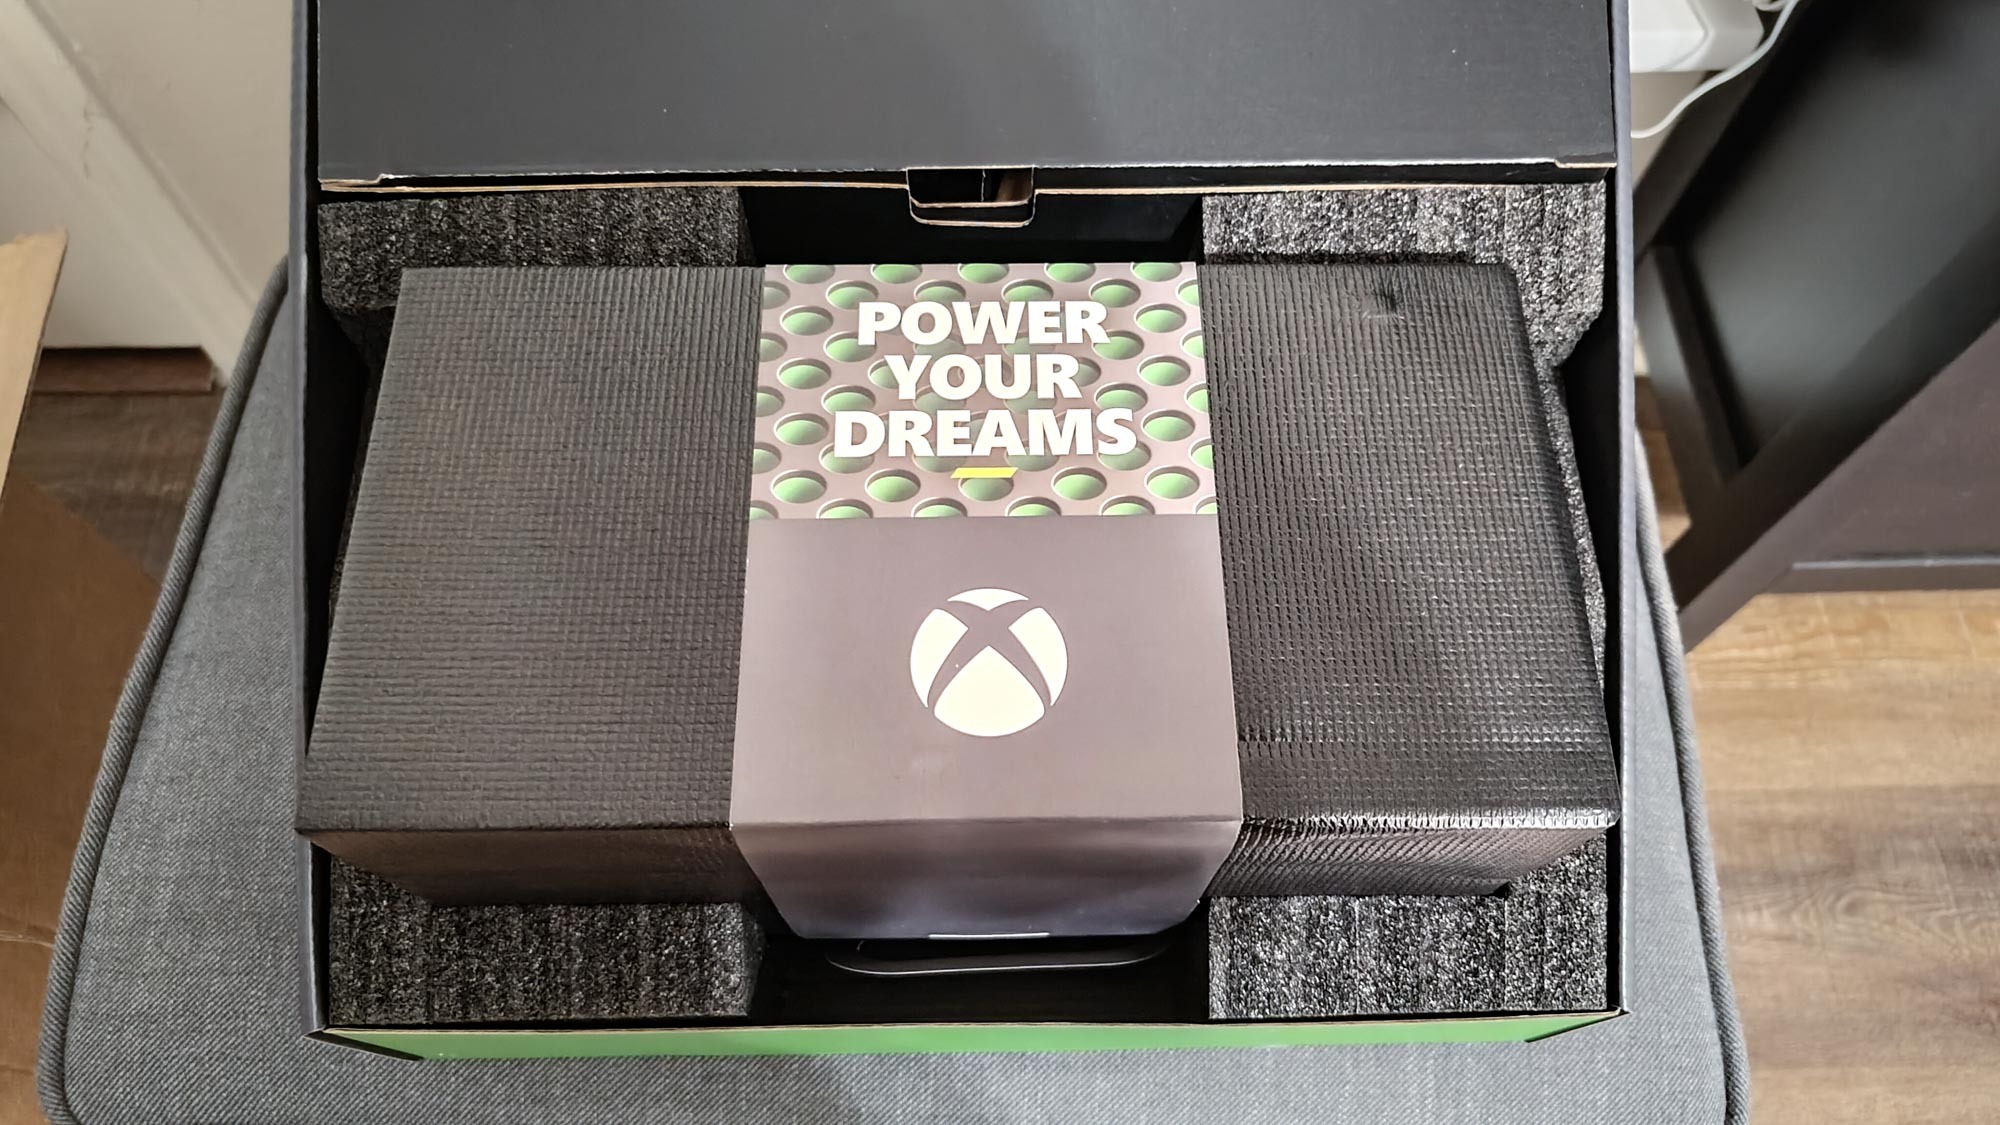 Unboxing a refurbished Xbox Series X from Microsoft